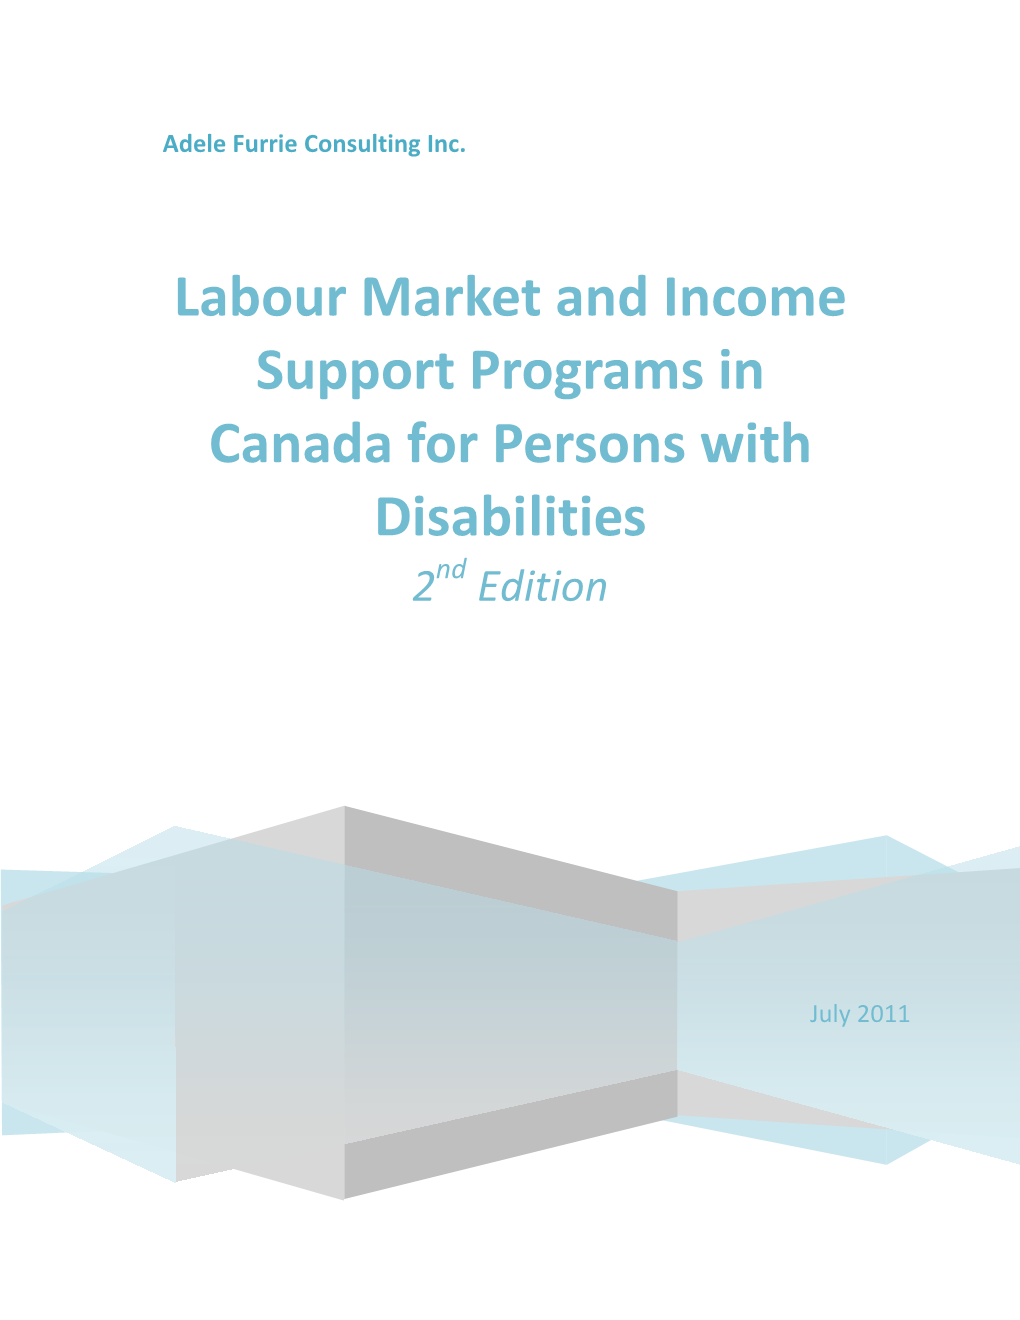 Labour Market and Programs in Canada for Persons with Disabilities